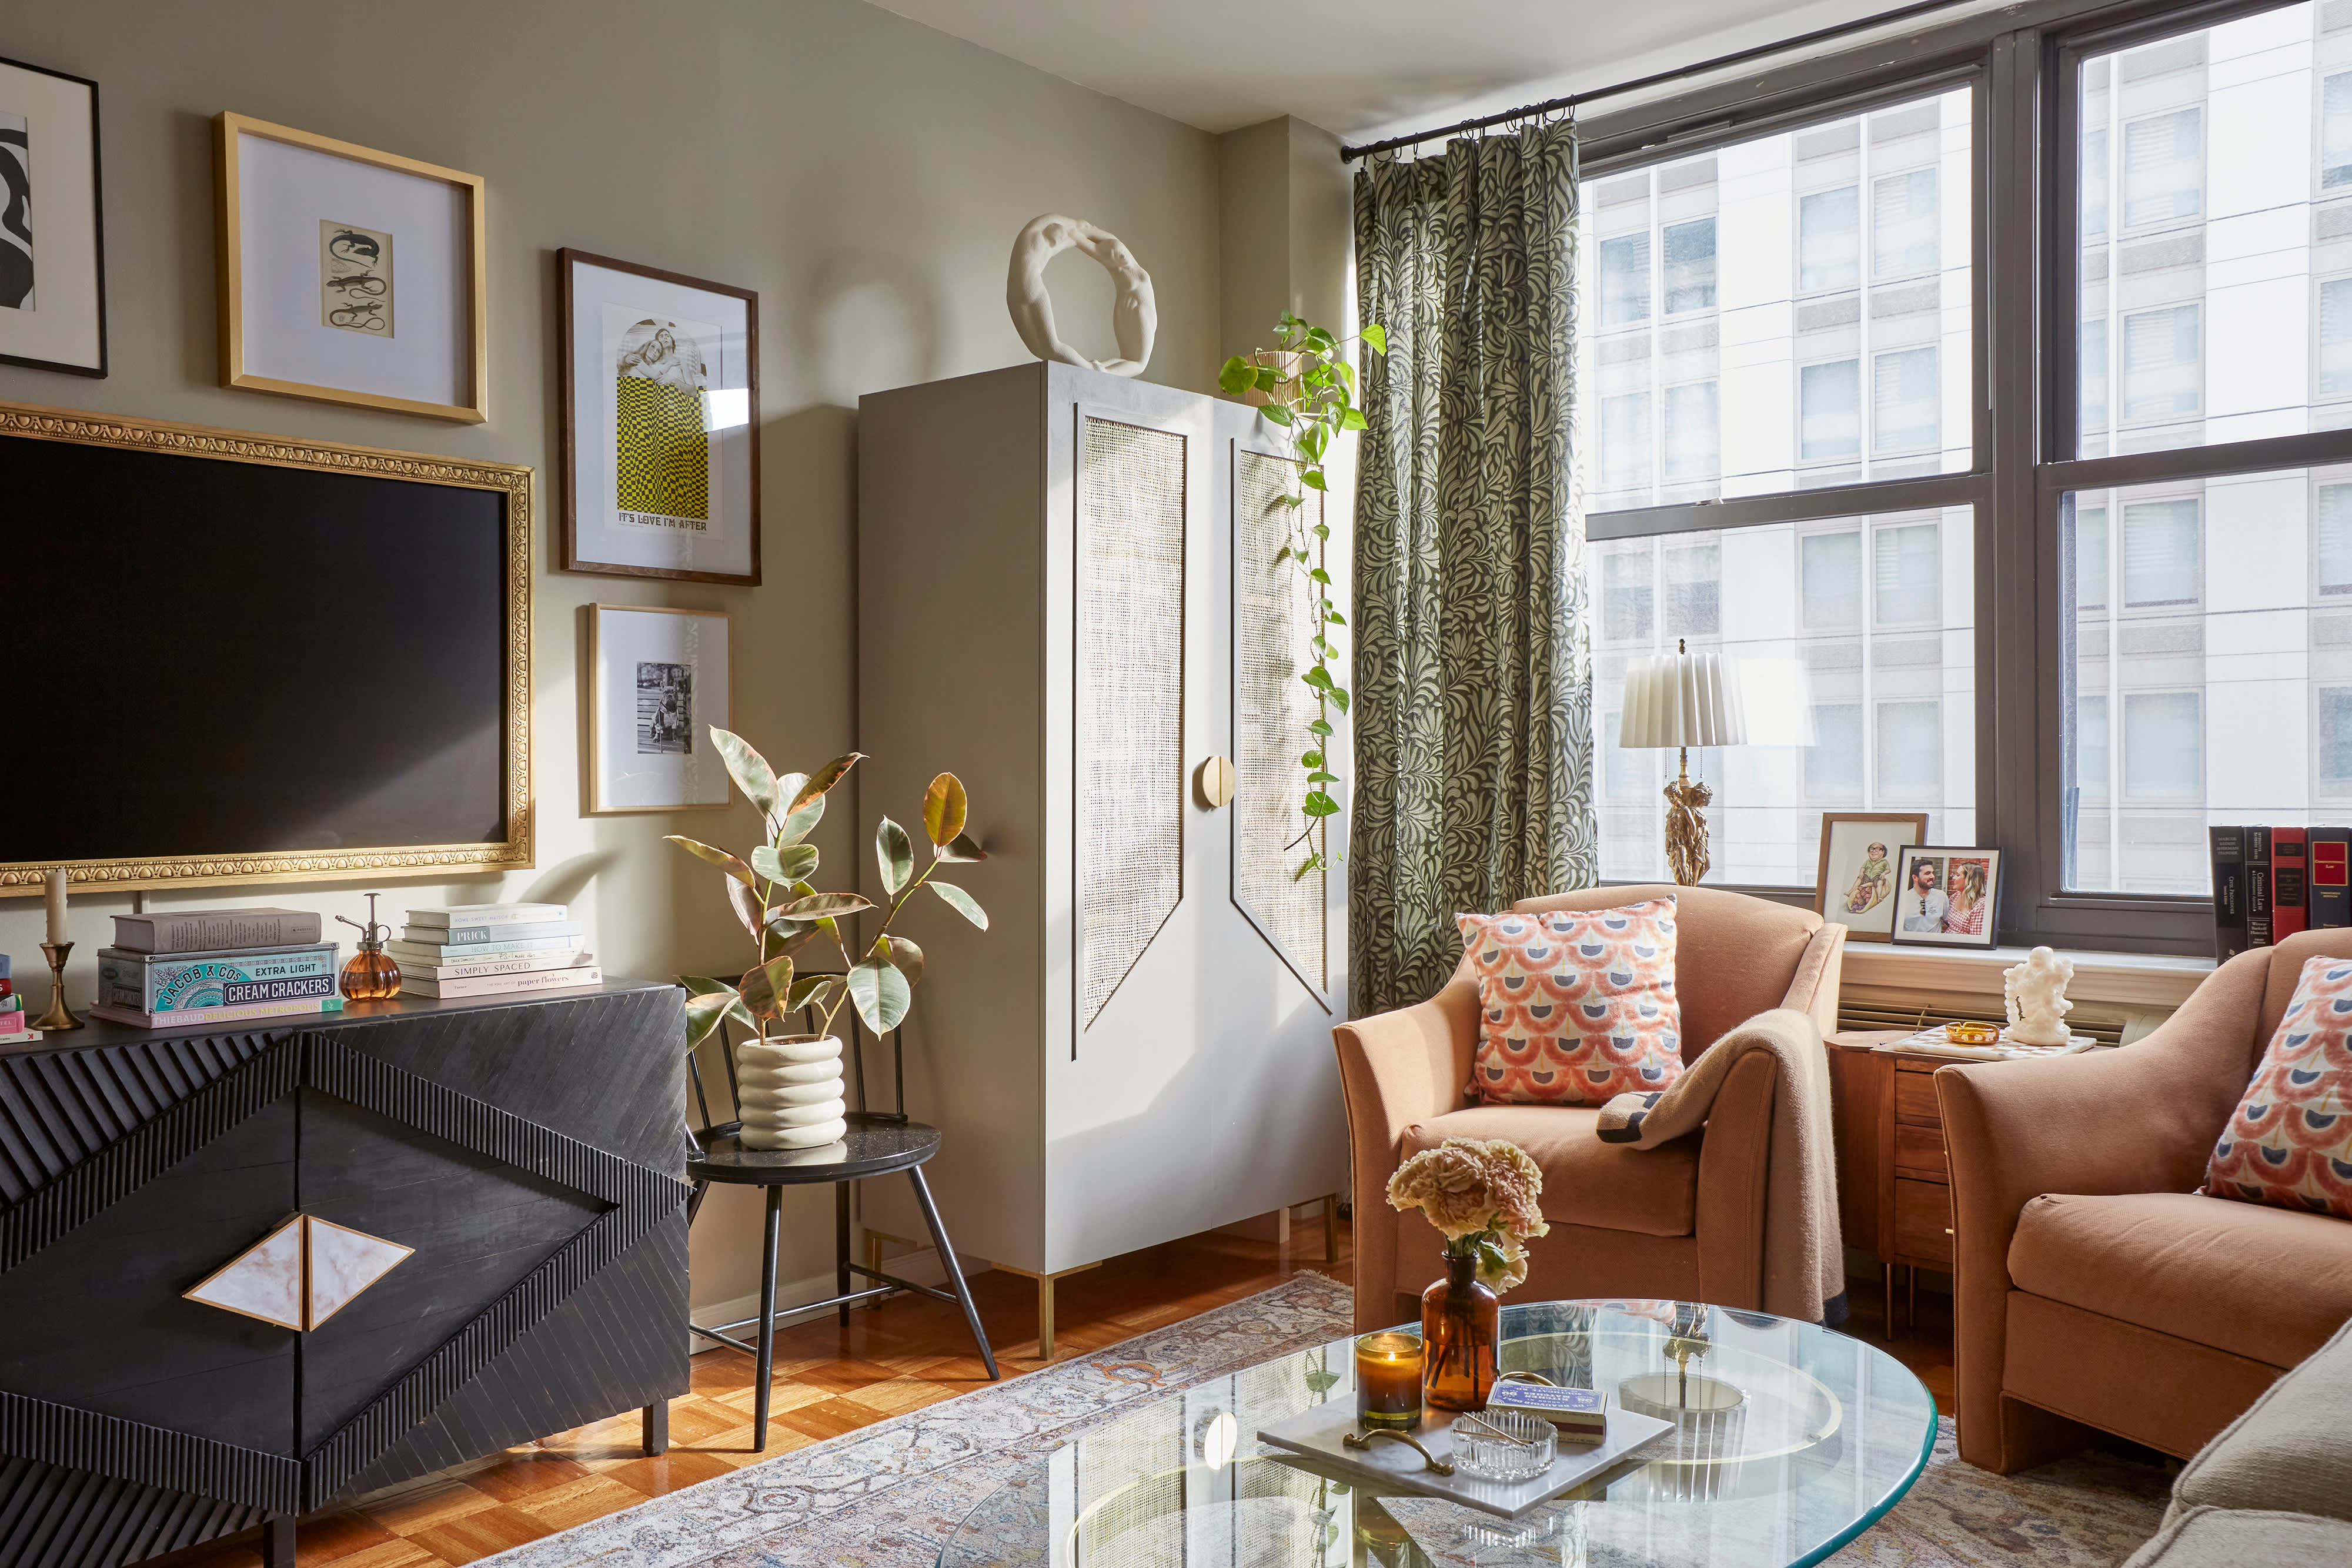 36 Apartment Decorating Ideas to Turn Your Rental Into a Home